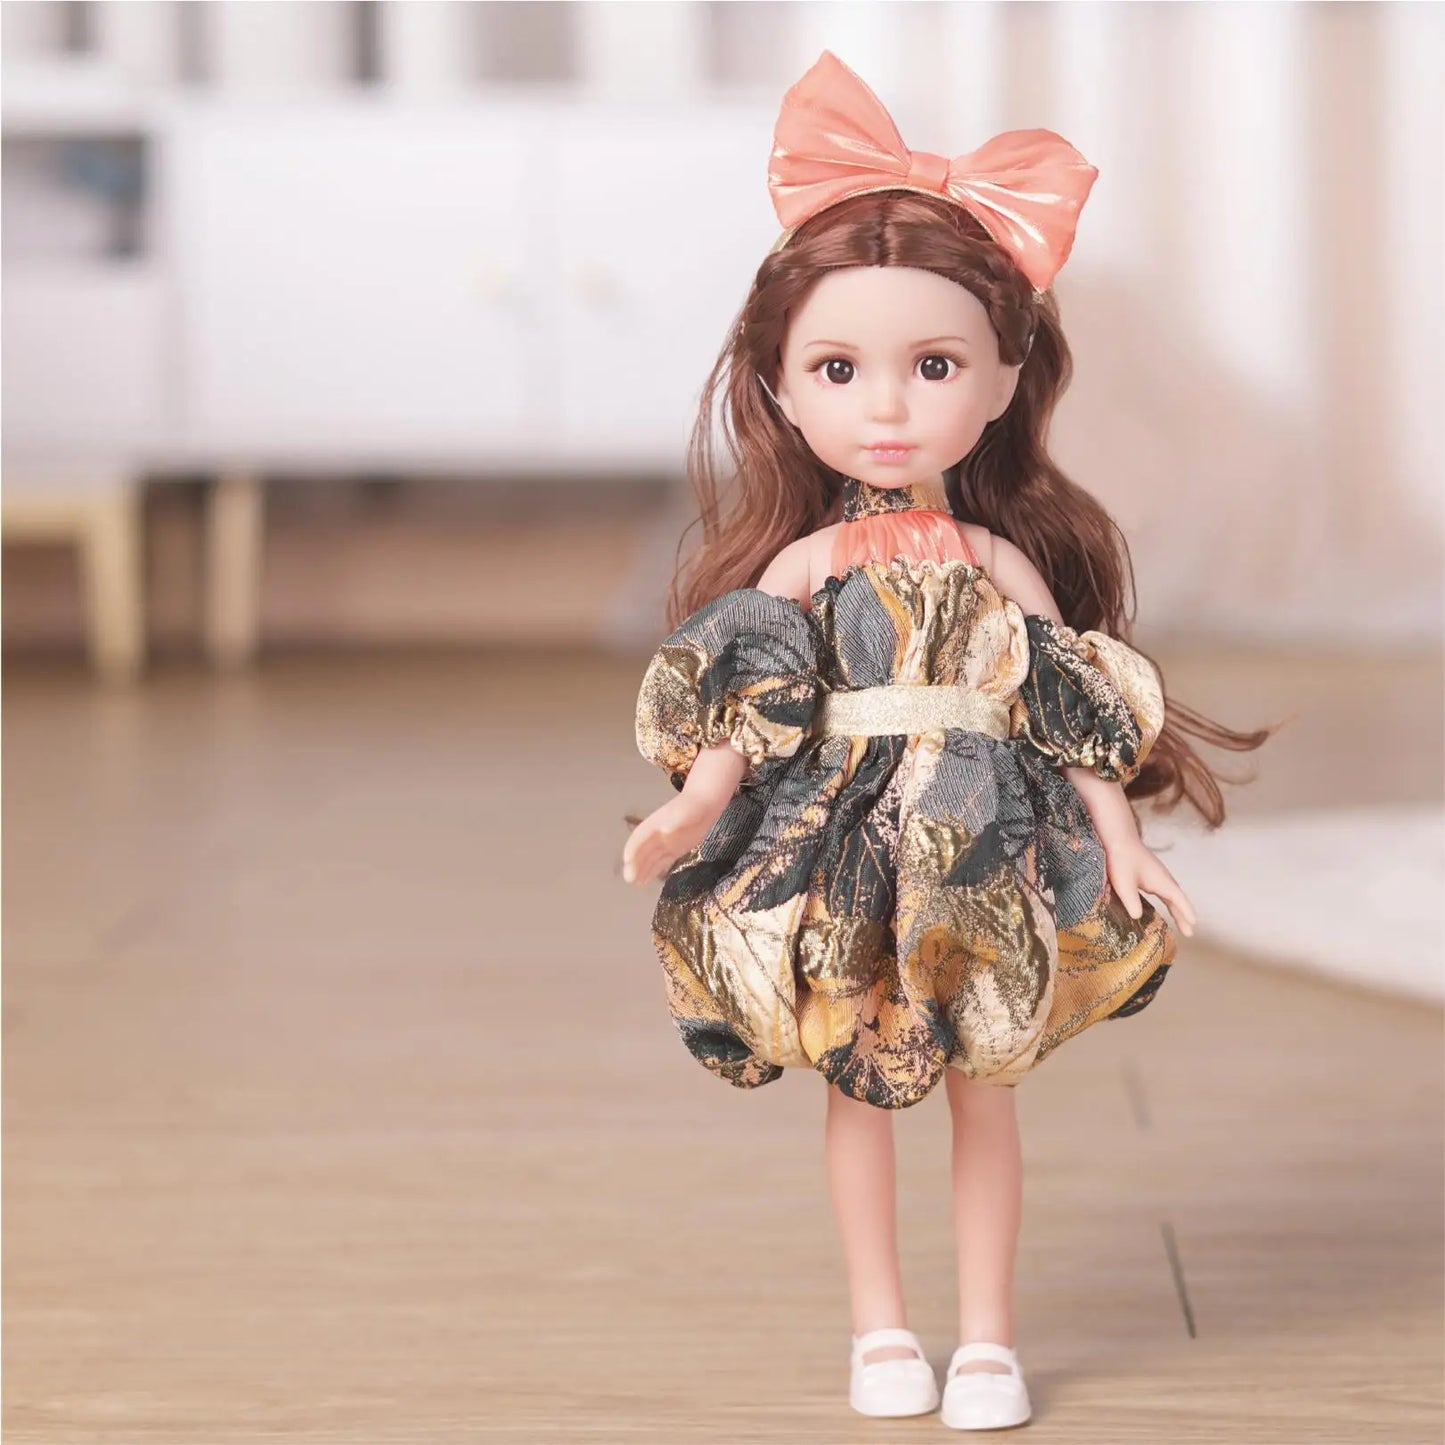 Girl's Full Vinyl Princess Doll with Clothes, 14 Inch Cute Madeup Doll - Annie Potter's Yarn Basket